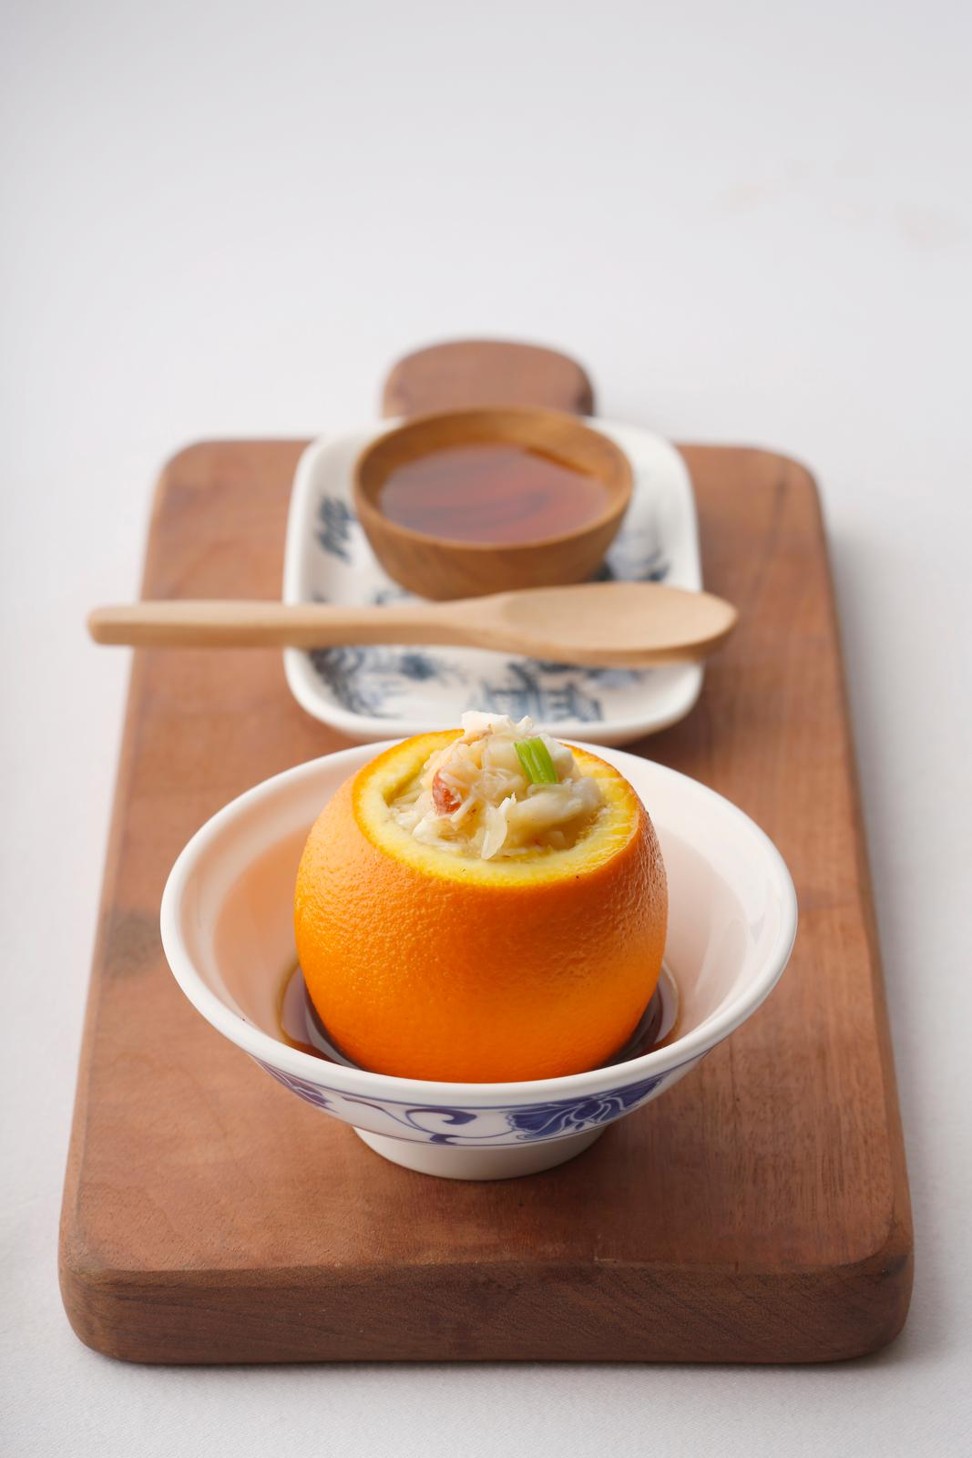 Where to eat imperial Chinese dishes fit for an emperor in Hong Kong